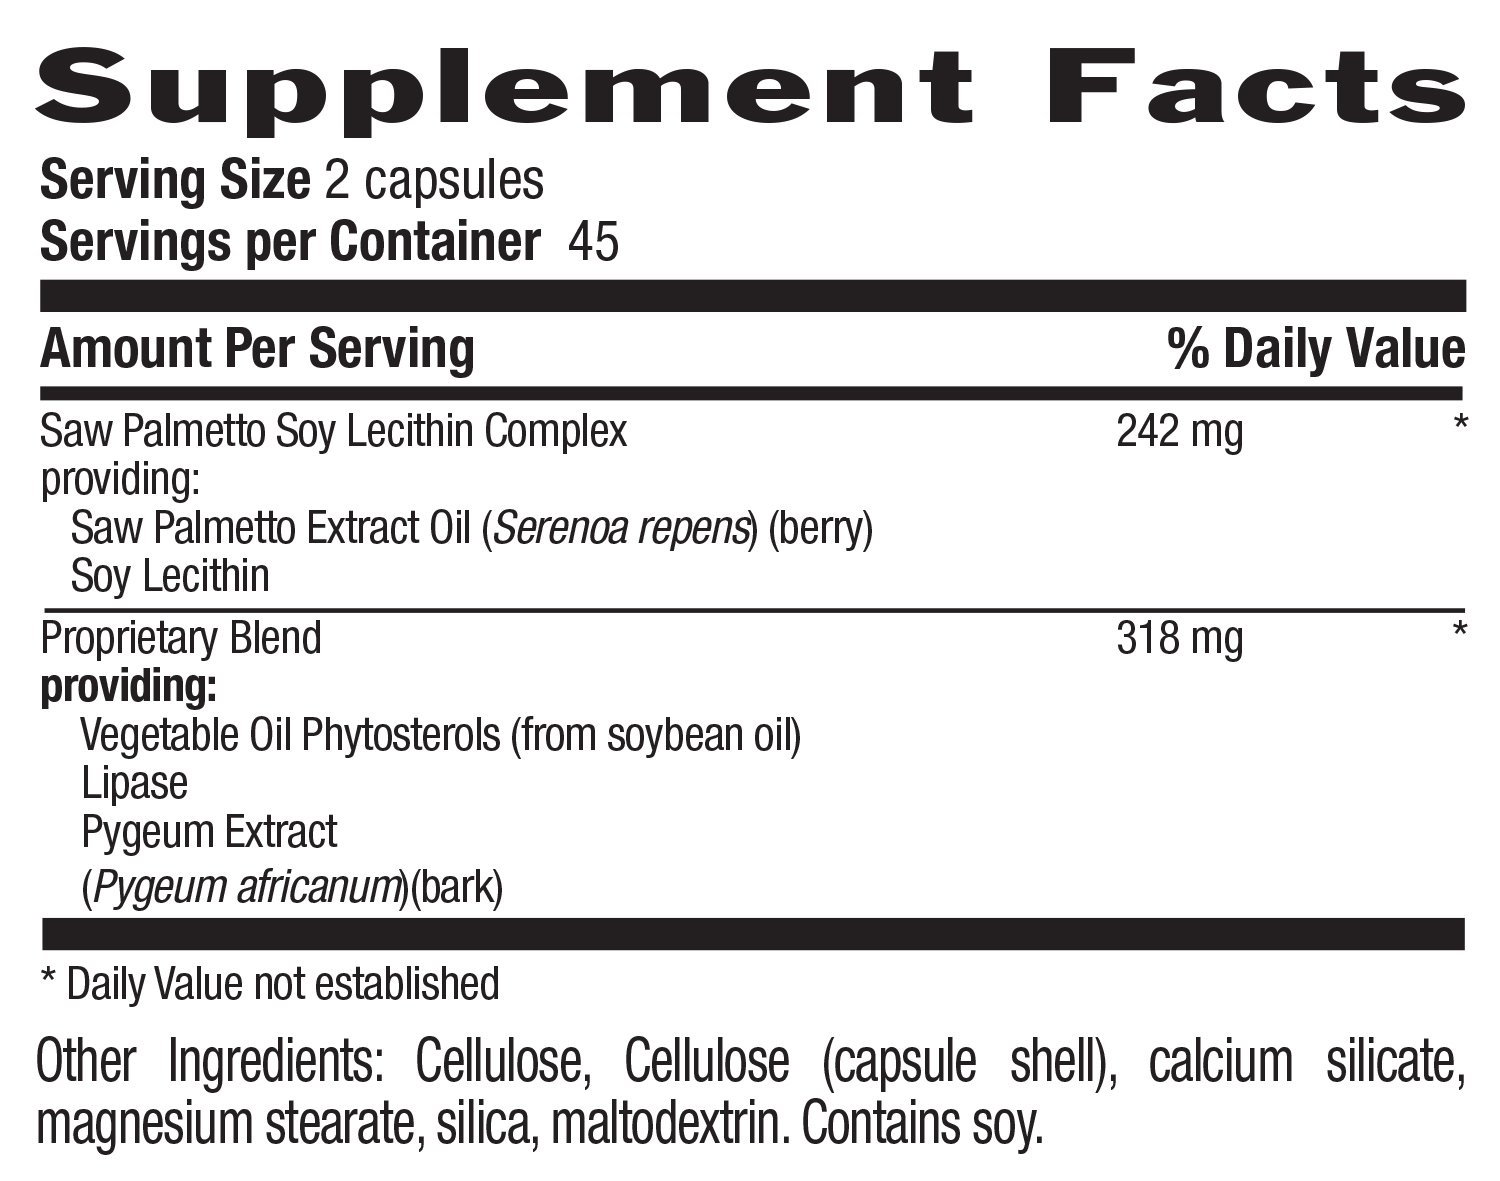 Saw Palmetto & Pygeum Extract